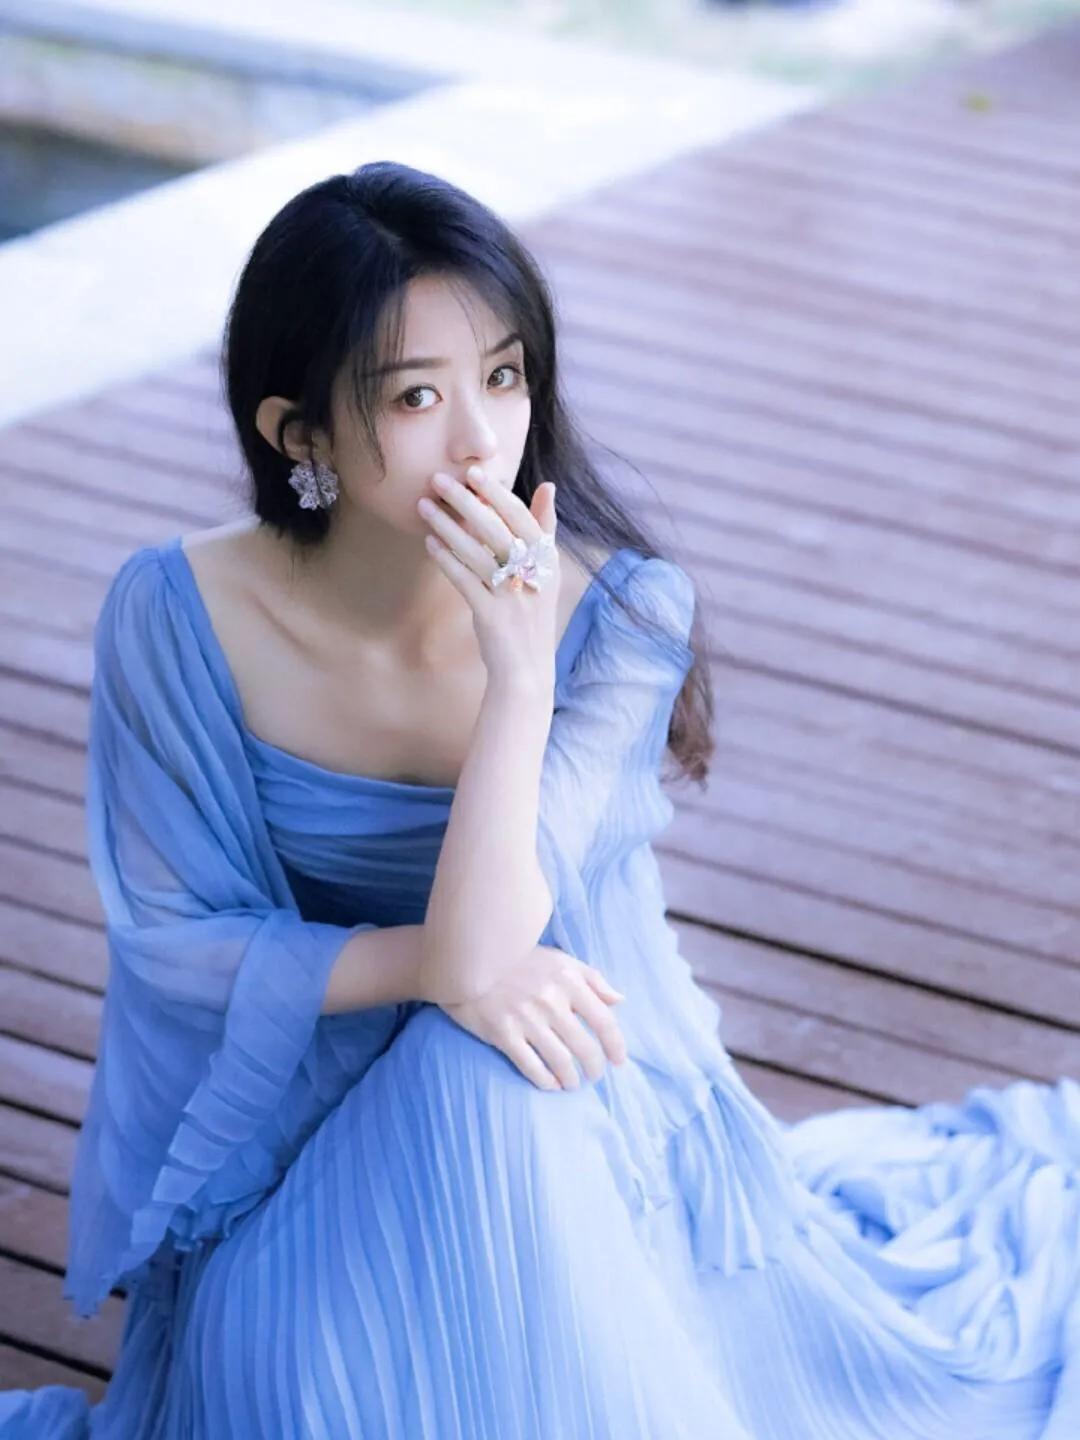 Zhao Liying Wears A Blue Pleated Long Skirt Fresh And Gentle With A Touch Of Sweetness And